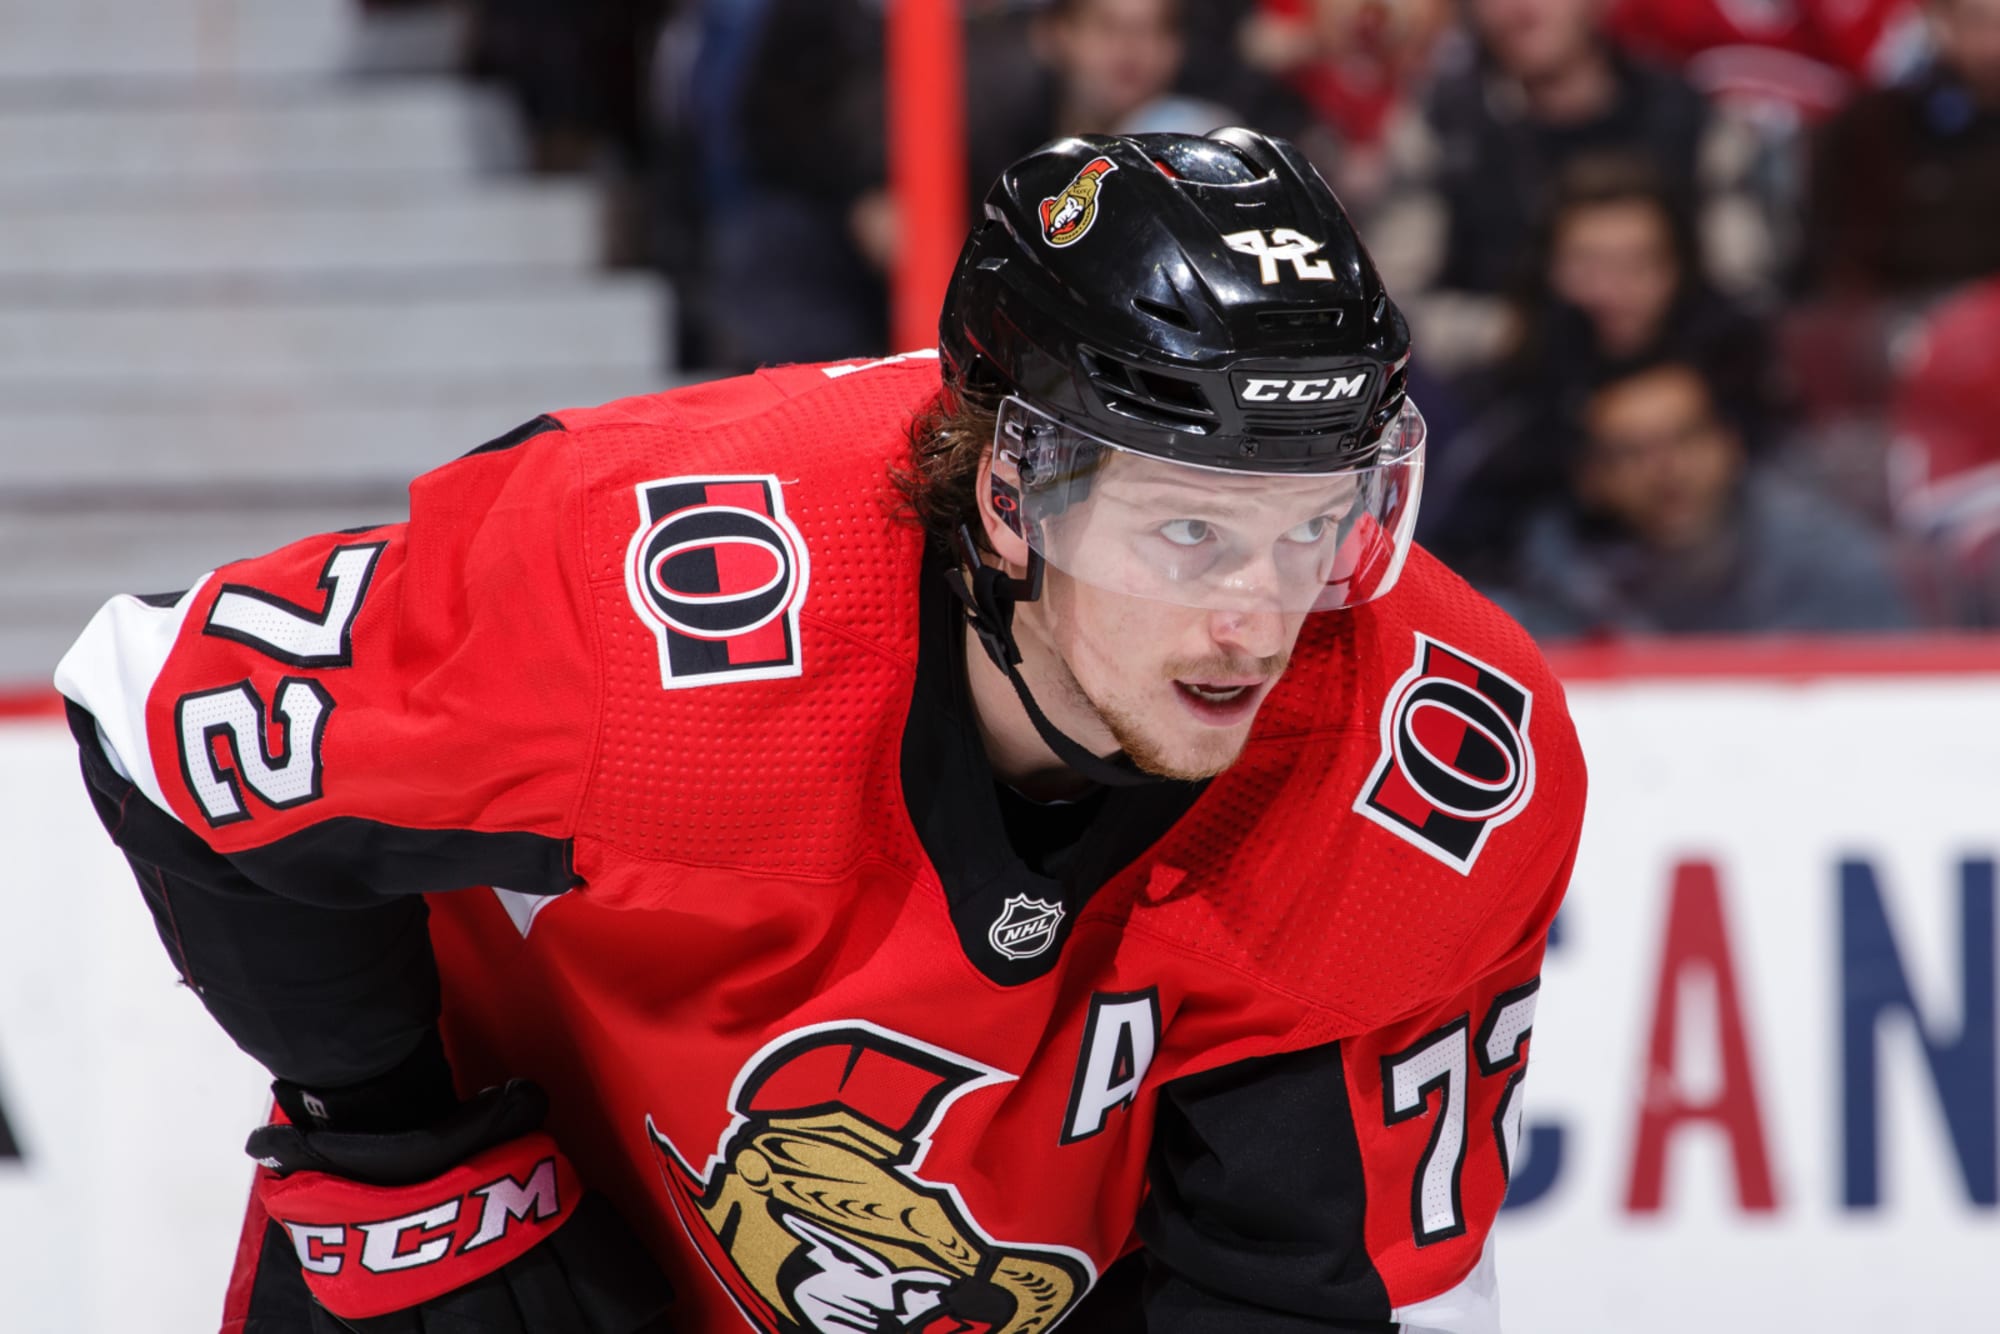 Senators to Chabot: 'Get your house in Ottawa